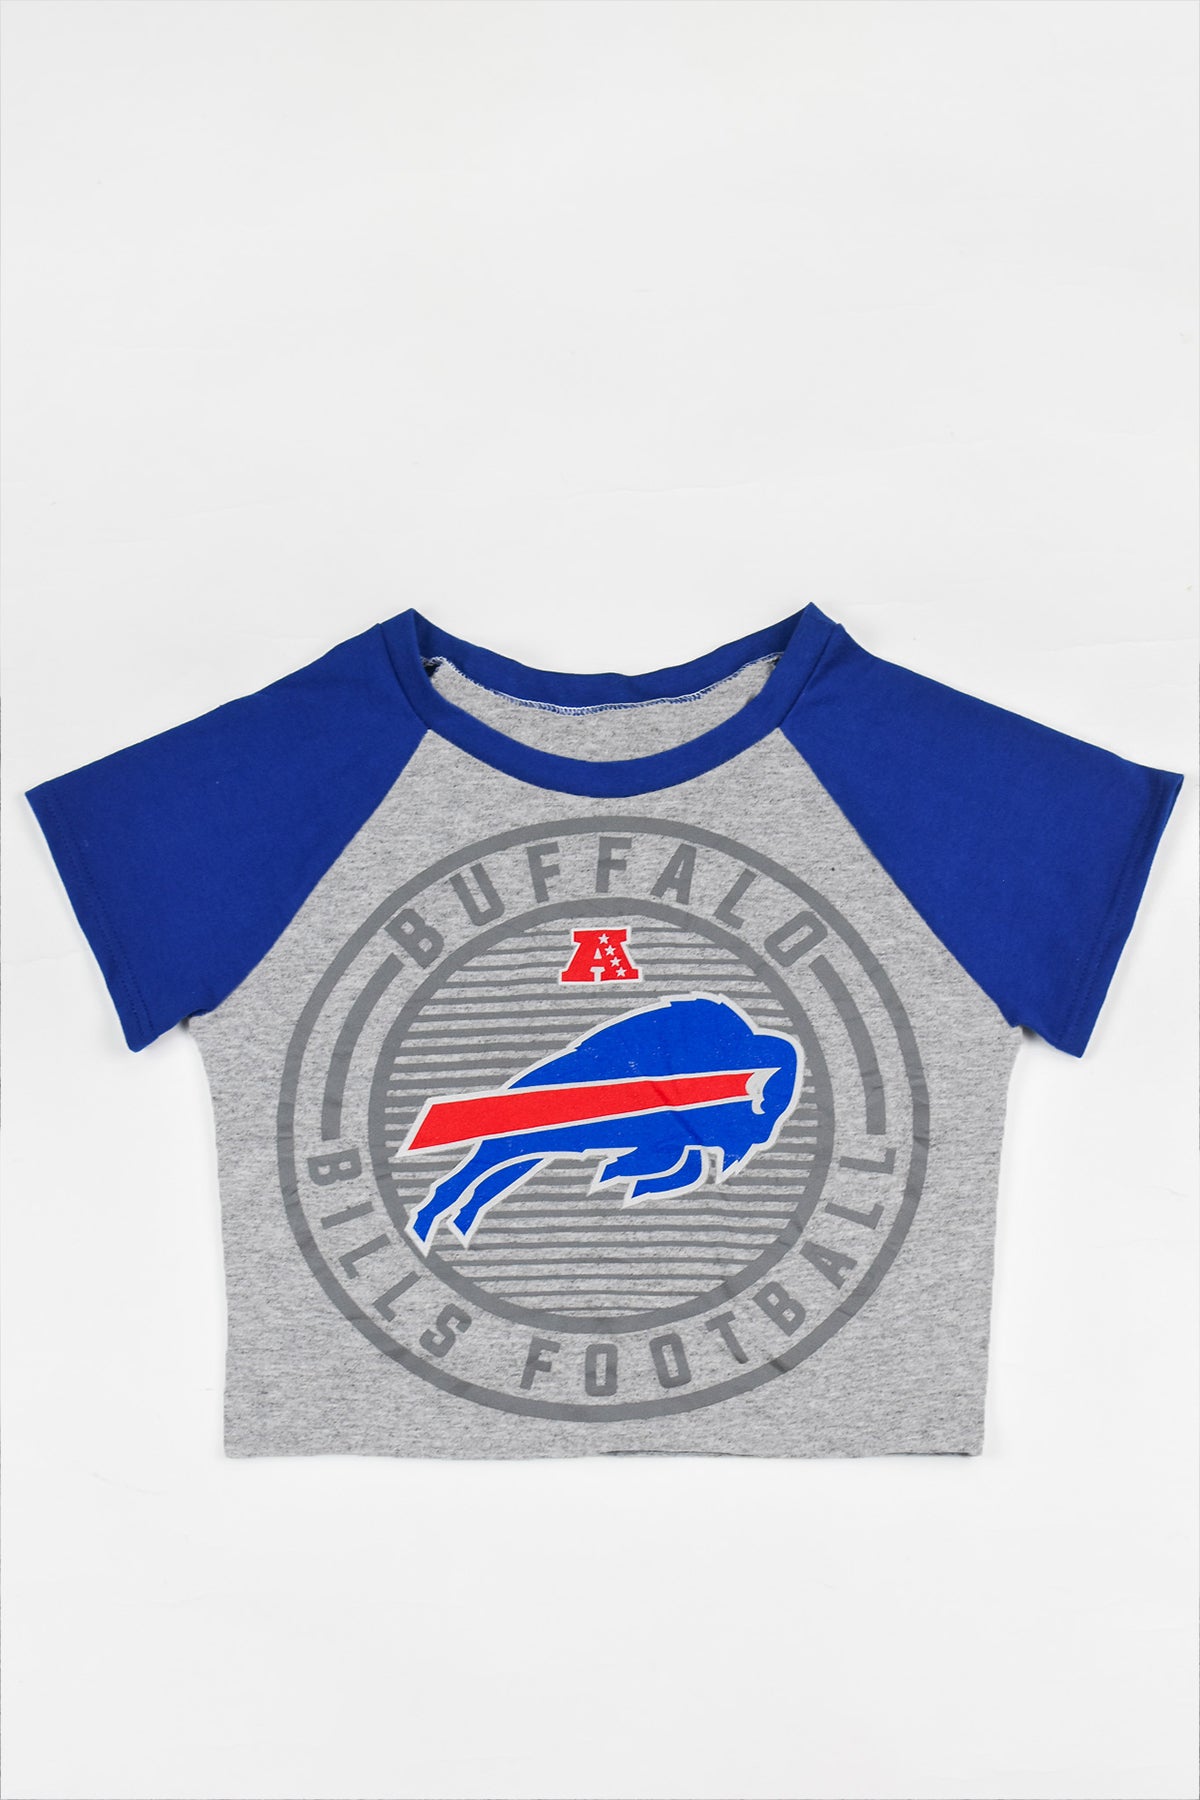 Upcycled Bills Baby Tee *MADE TO ORDER*